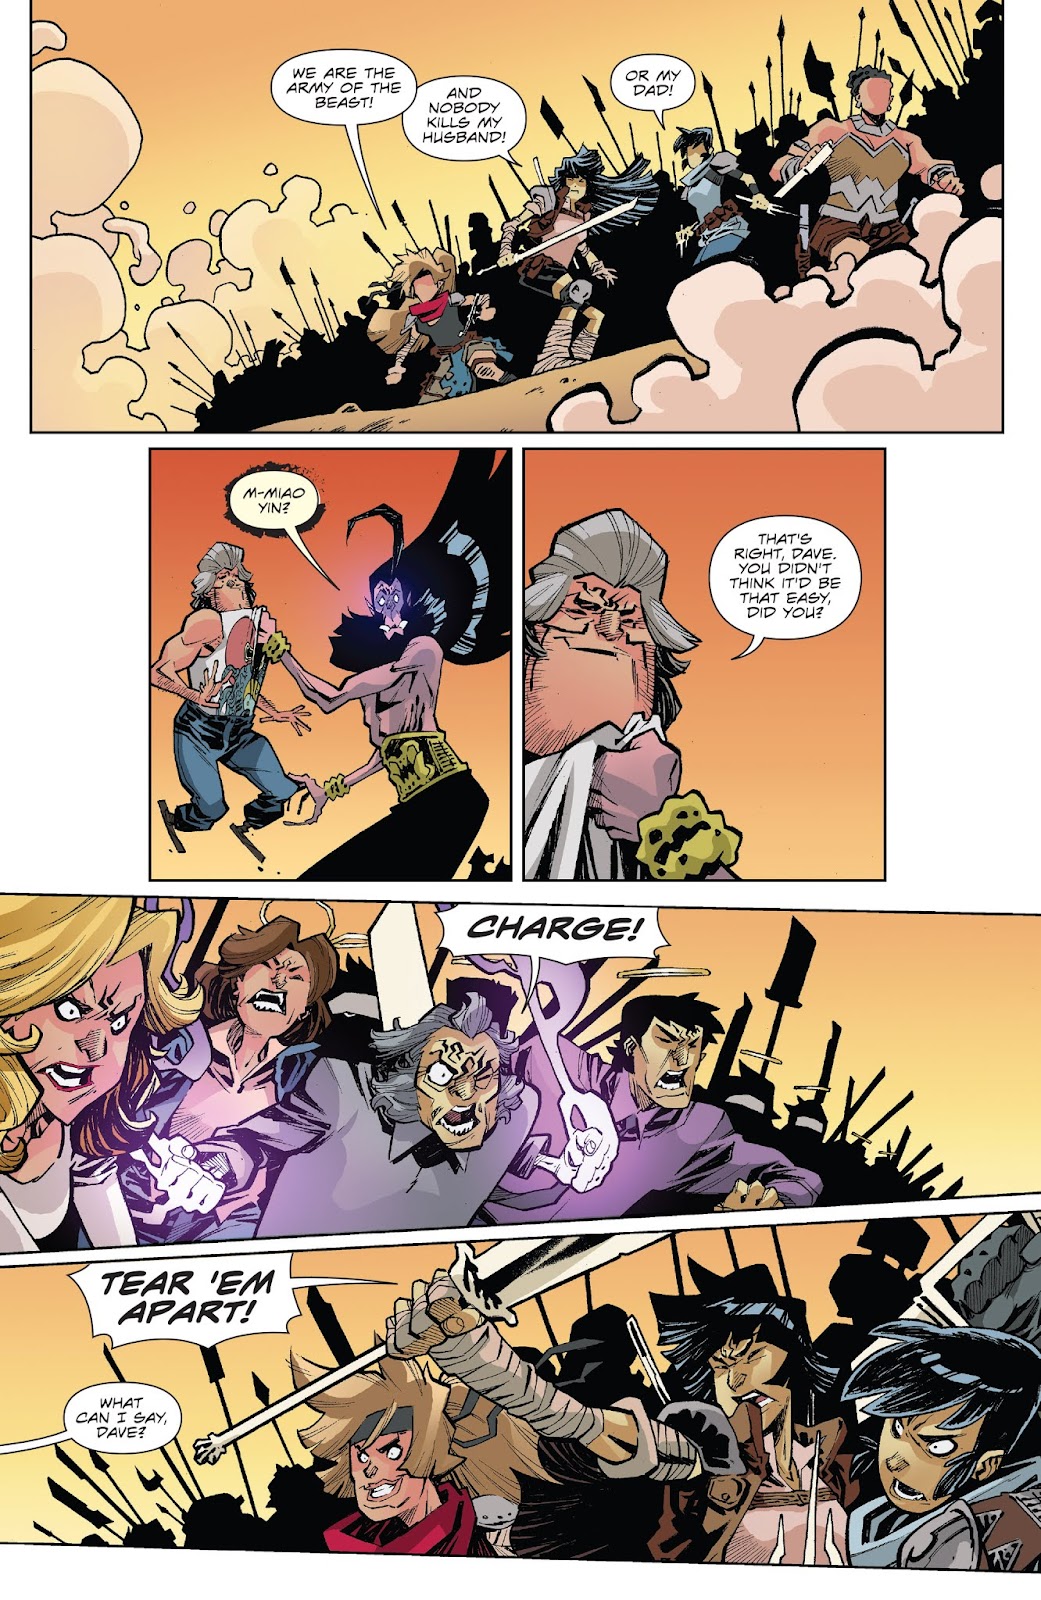 Big Trouble in Little China: Old Man Jack issue 11 - Page 23